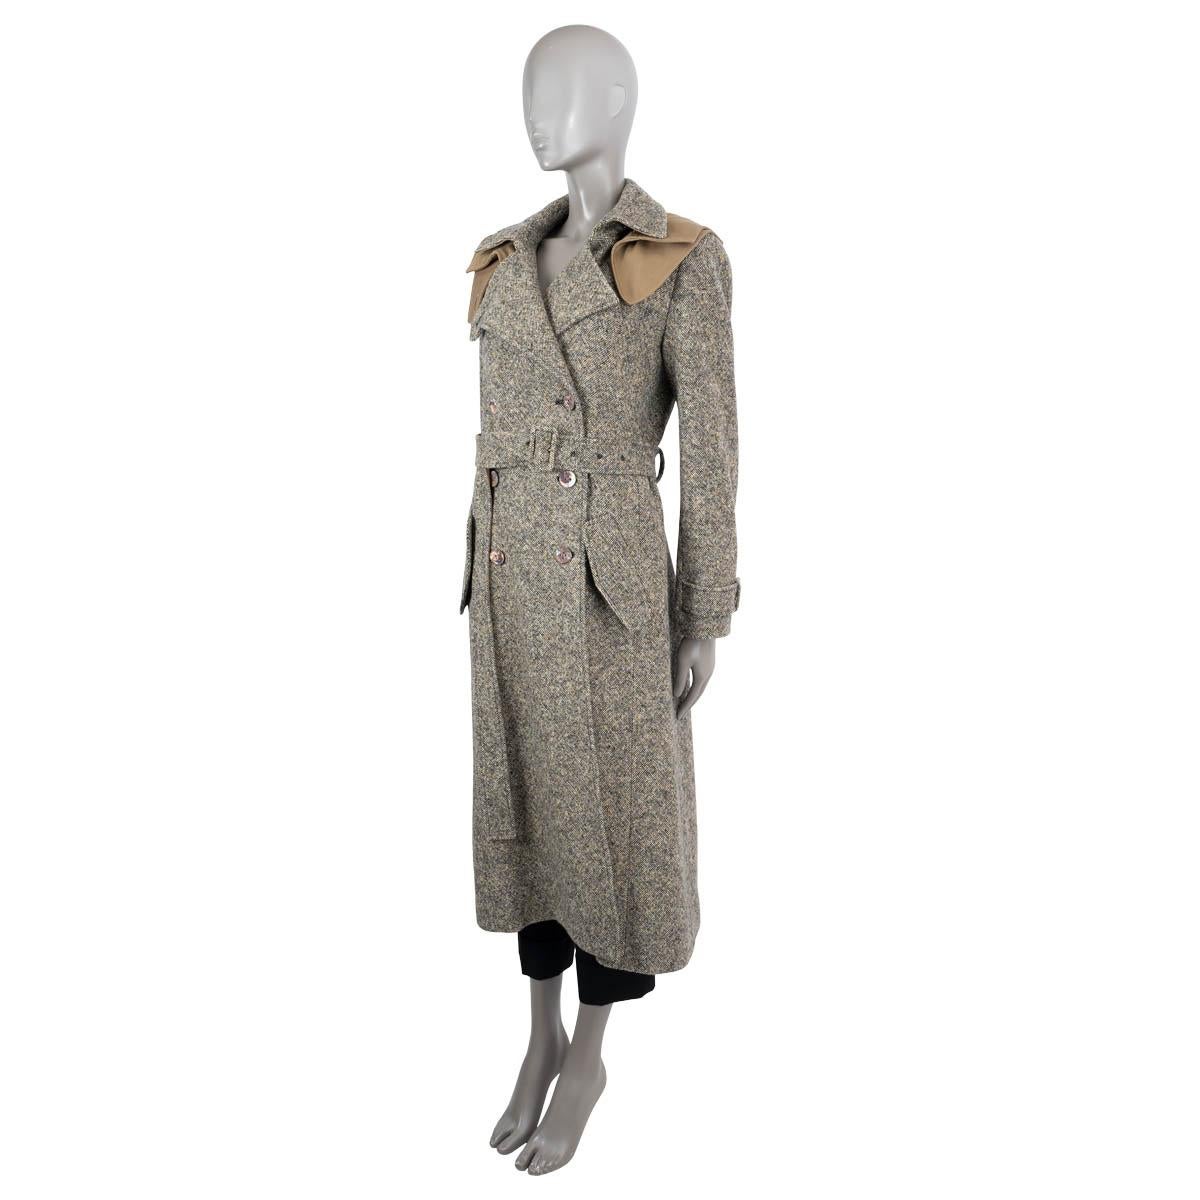 100% authentic Chloé tweed trench coat in dark brown, beige and ivory wool (70%) and silk (30%). Features a tailored double-breasted silhouette, removable contrast cotton gaberdine hood, two flap pockets on the sides, matching fabric belt and belts